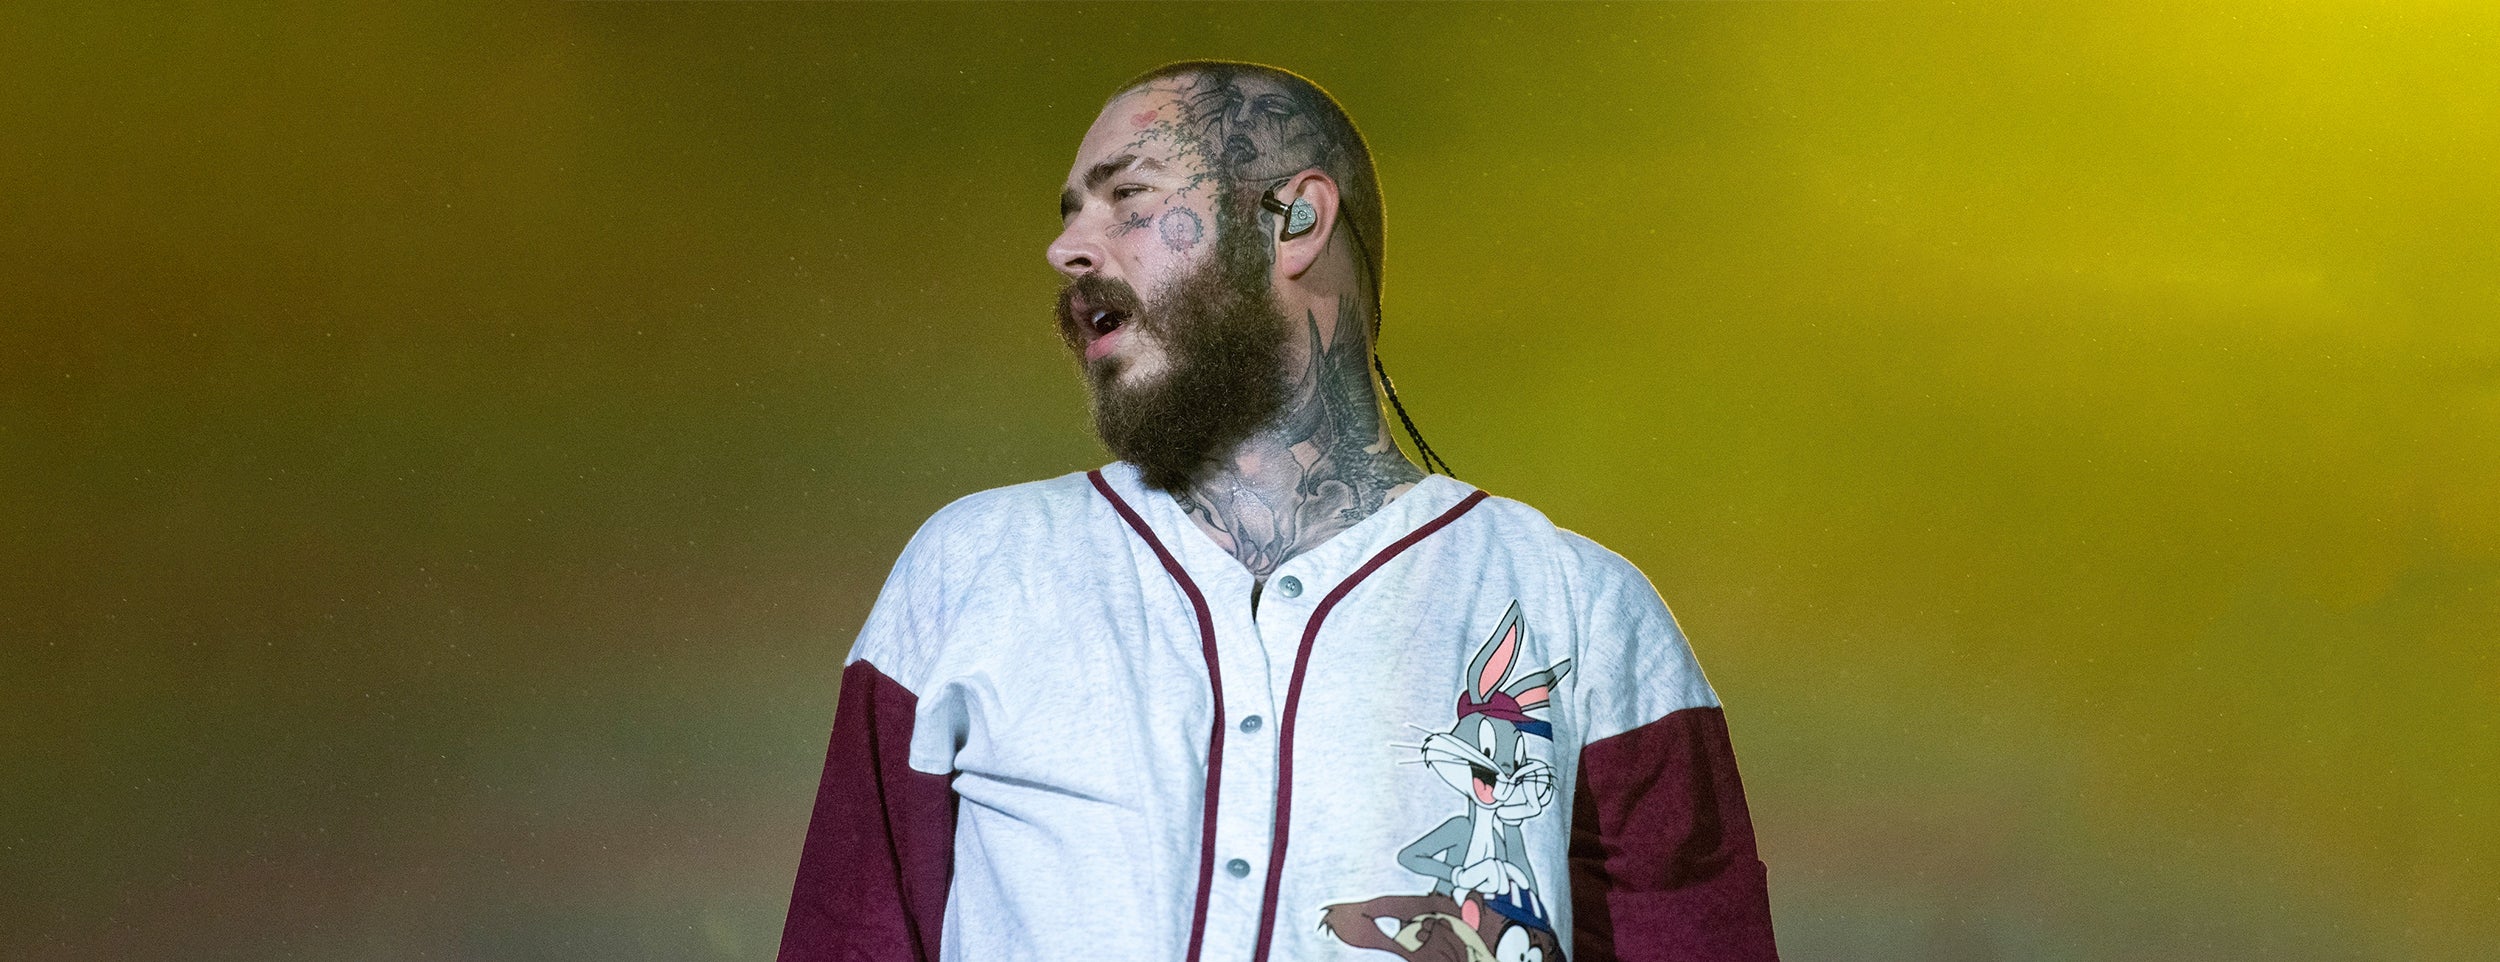 The most tattooed celebrity is Post Malone